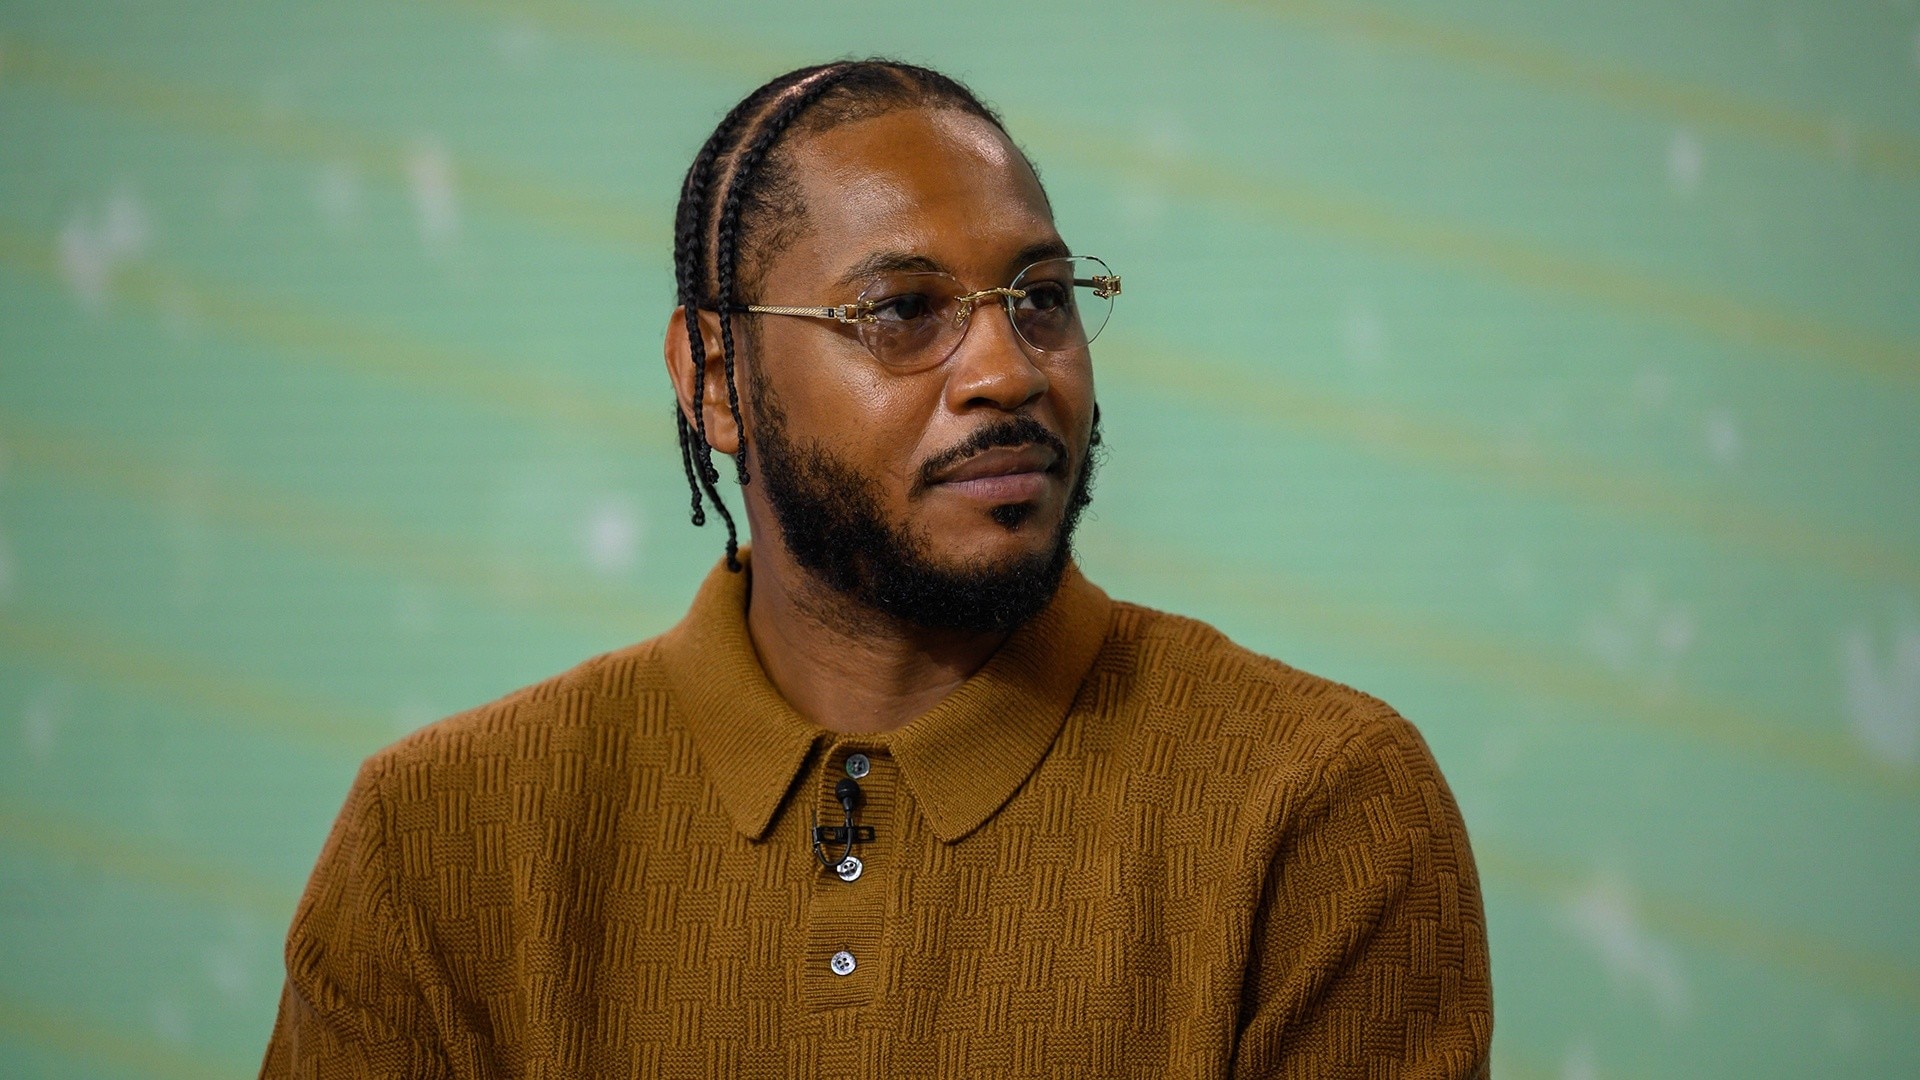 Watch TODAY Excerpt NBA star Carmelo Anthony opens up in new memoir